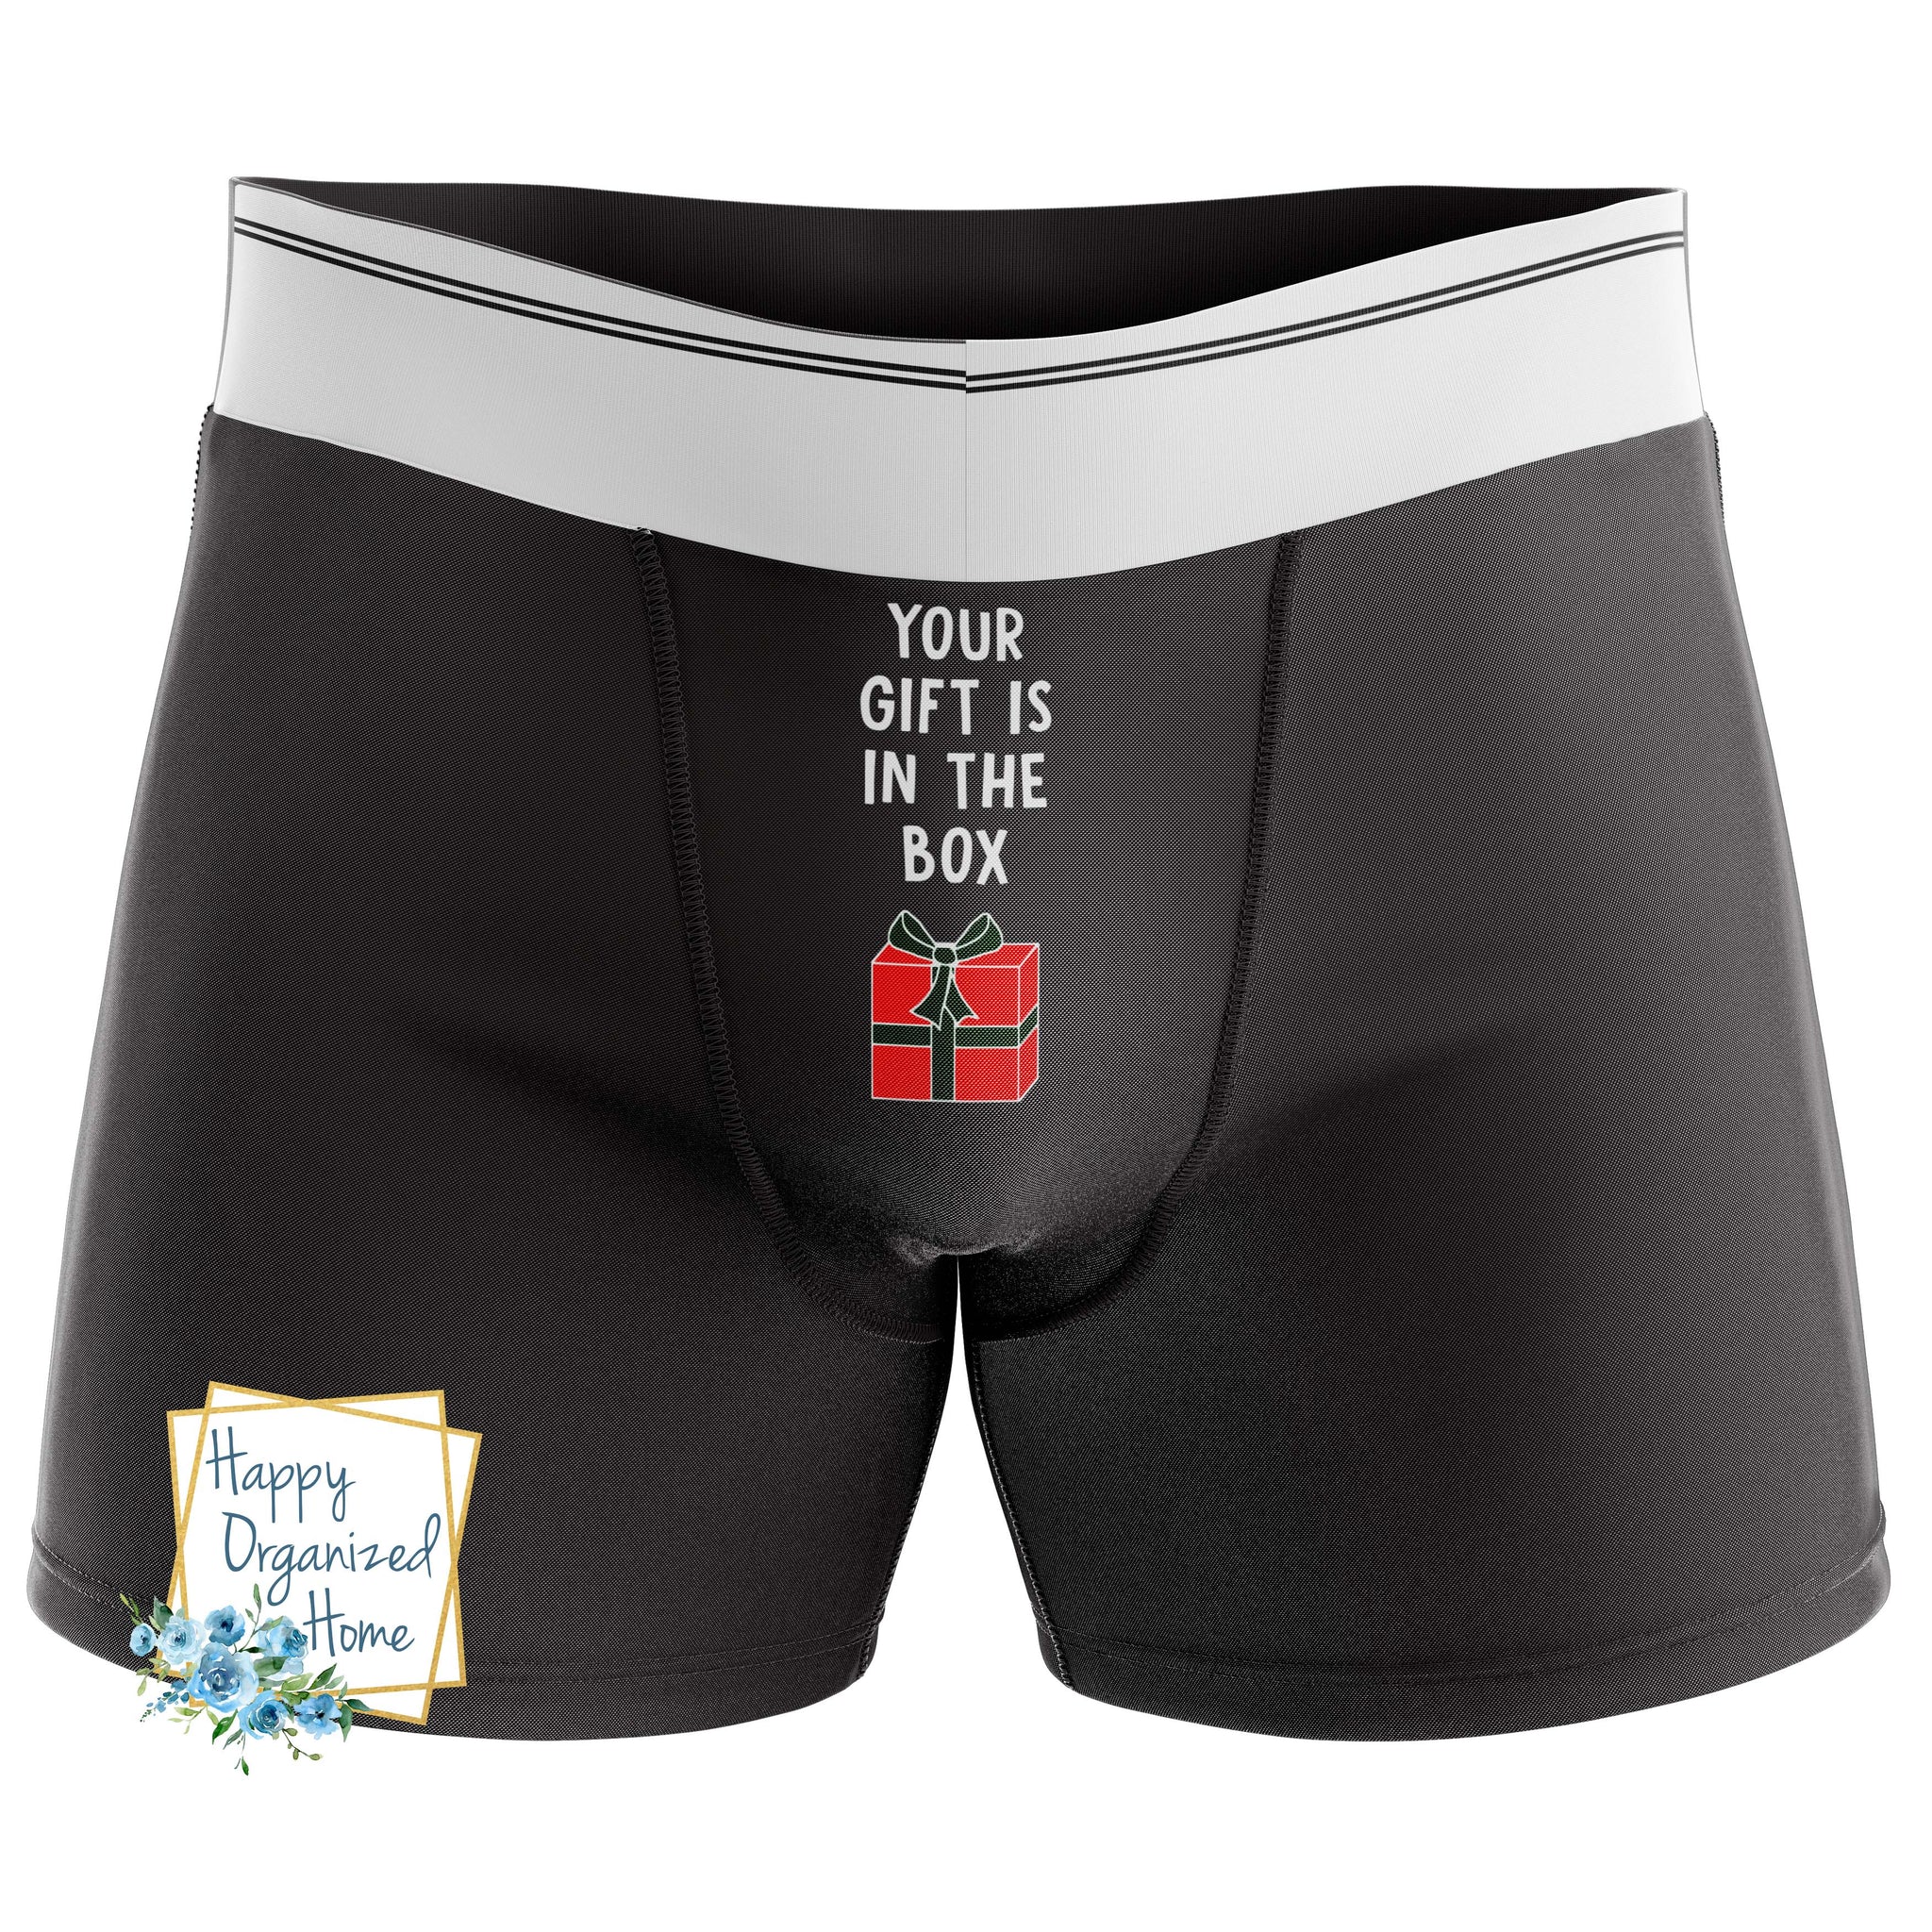 Your gift is inside the box -  Men's Naughty Boxer Briefs